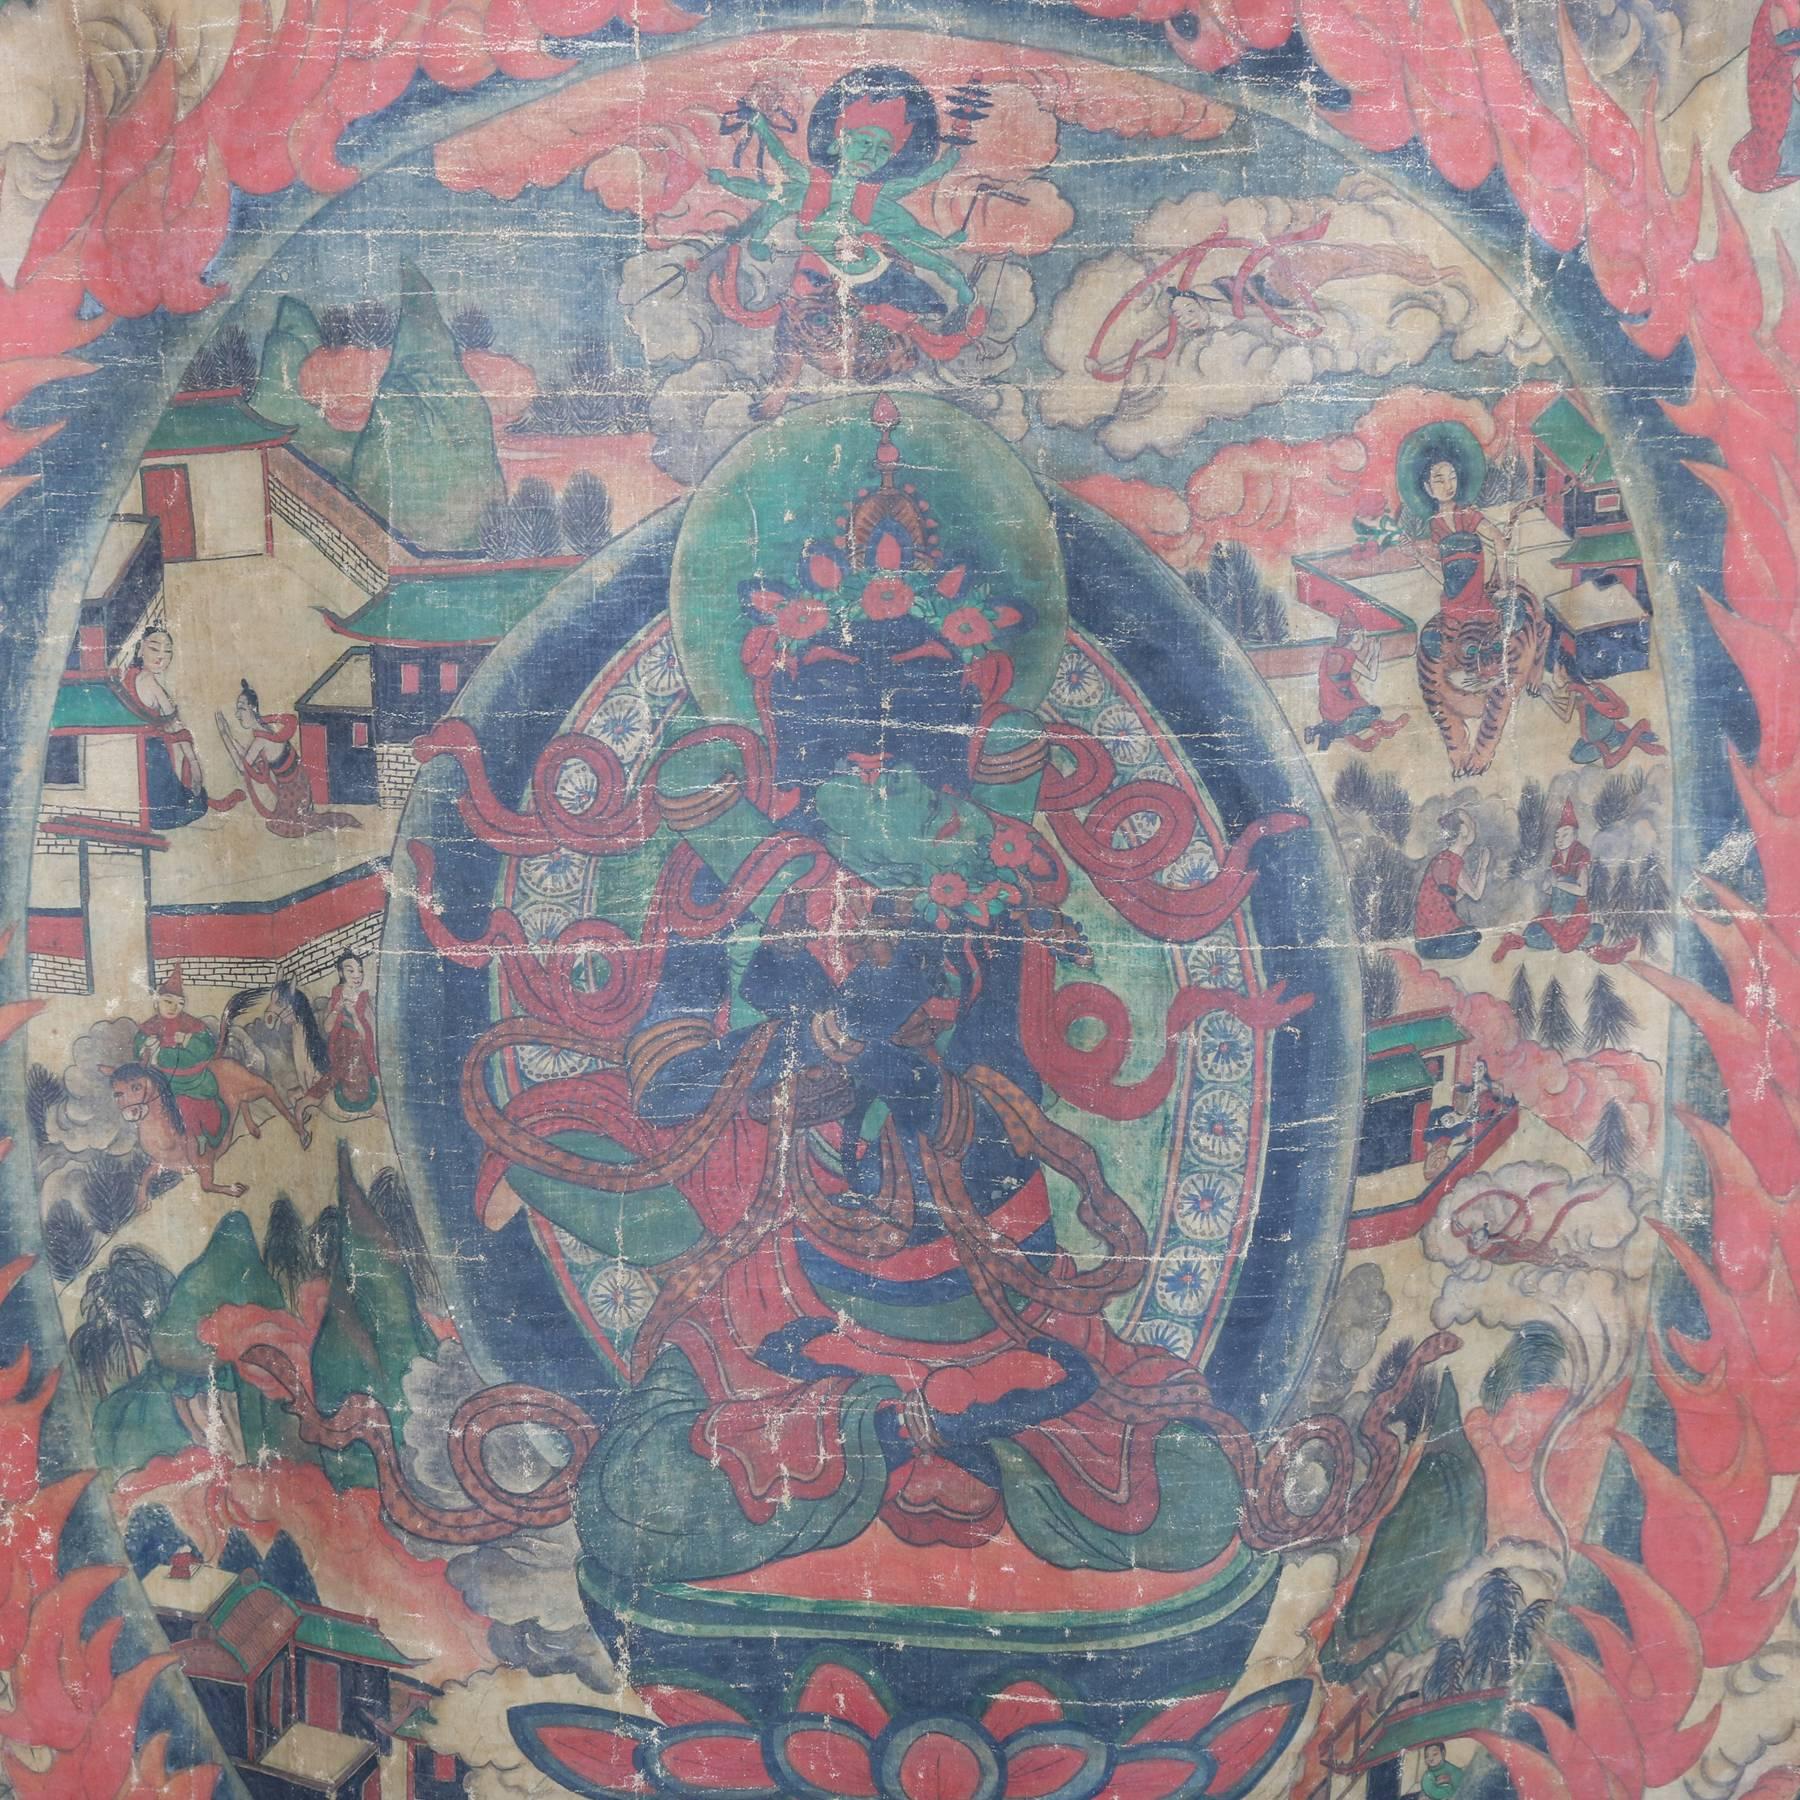 Antique Tangkasnet Thangka Tibetan scroll features hand-painted central Buddhist figure in ring of stylized fire with surround design of figures, hunt scenes, and village scenes, 19th century

Measures: Overall 56" H x 42" W, los: